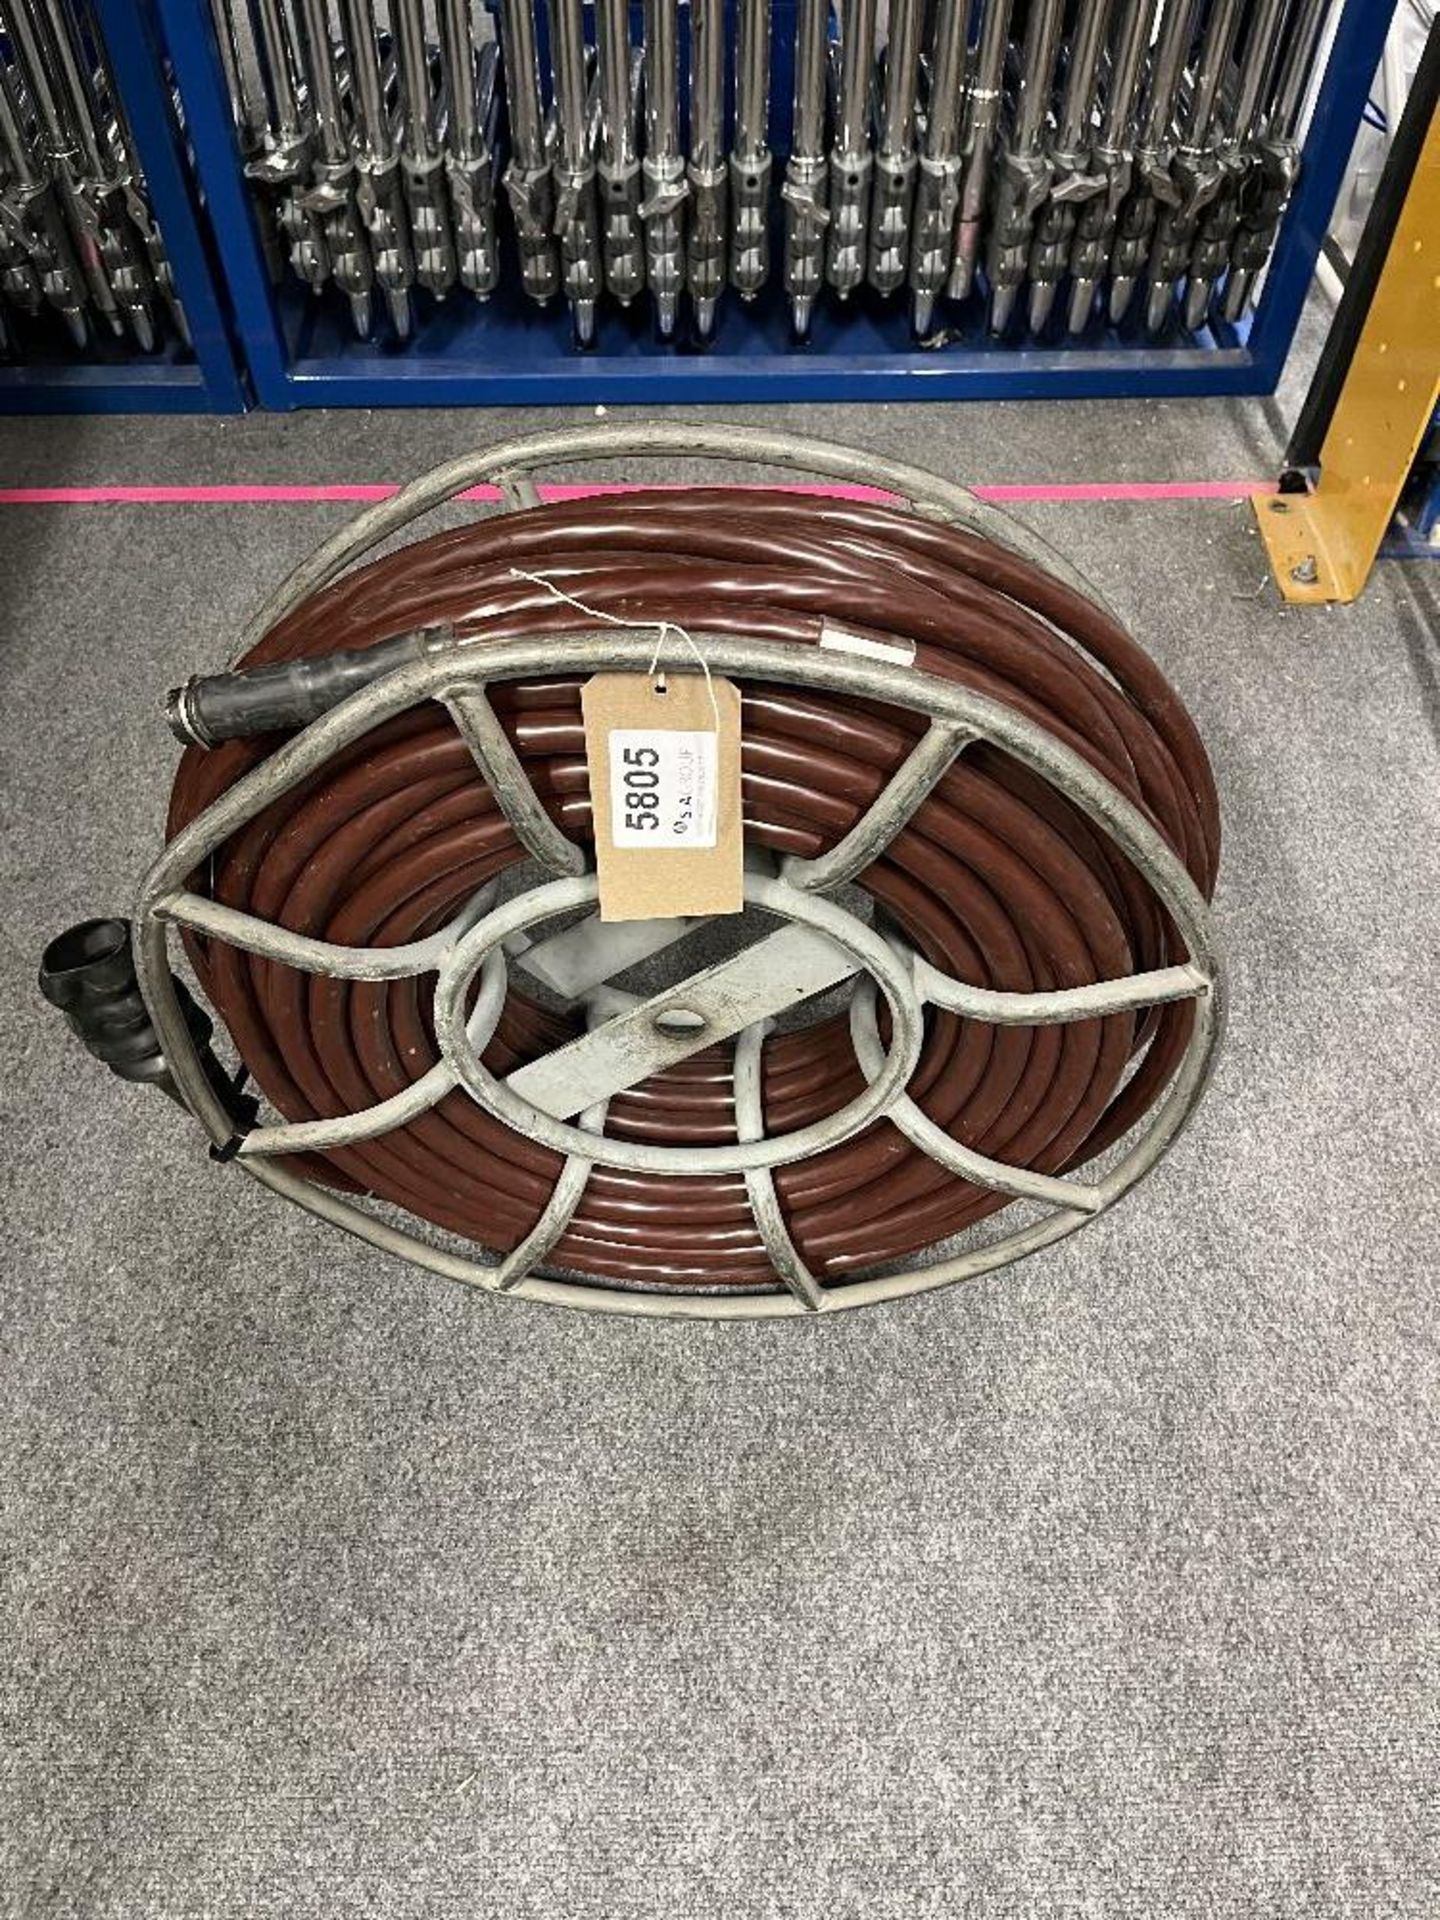 Multicore 60m Cable on Metal Skeleton Fibre Reel - Image 2 of 3